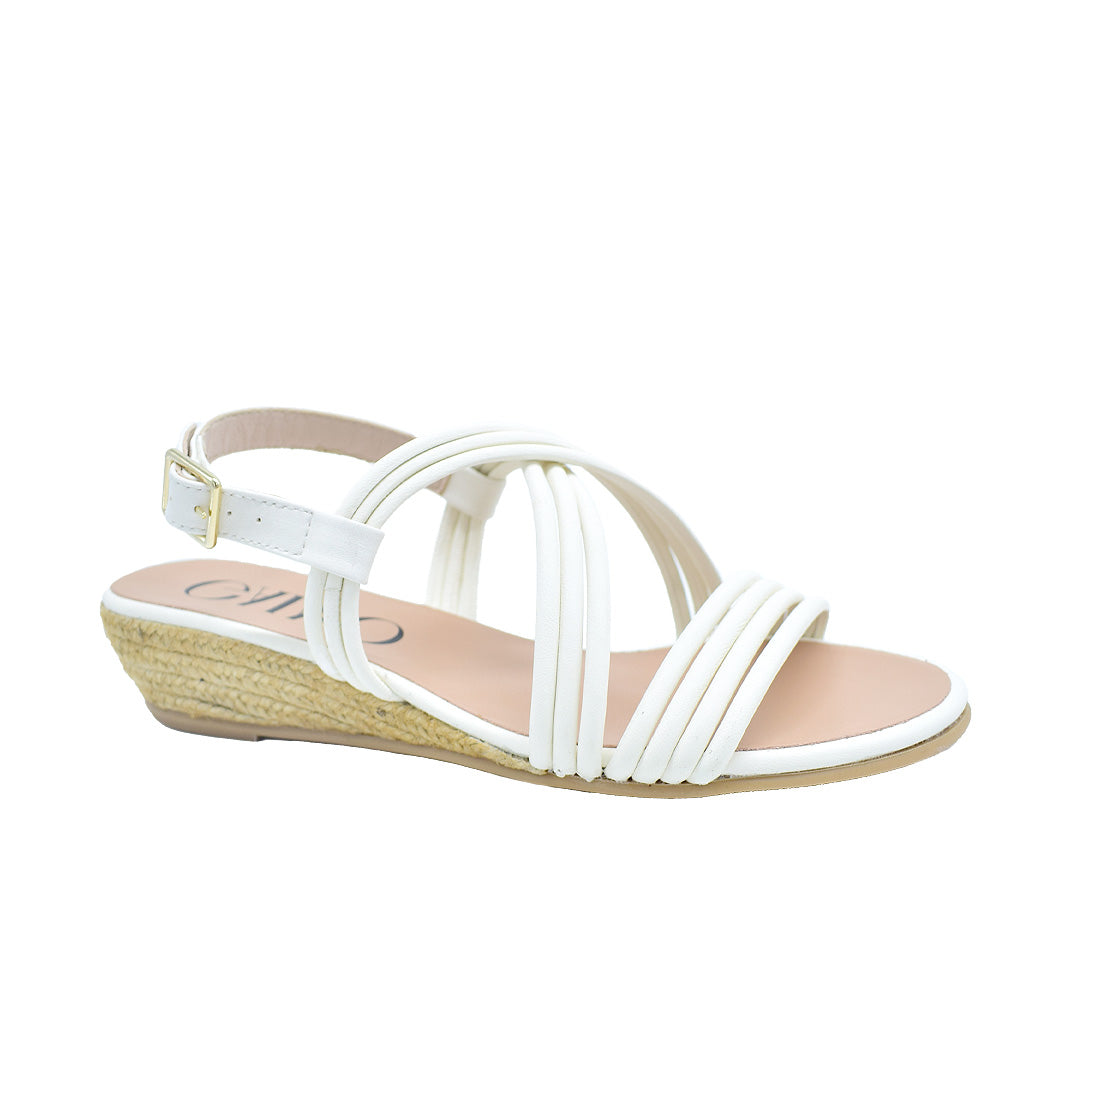 white sandals handmade espadrilles in jute and leather